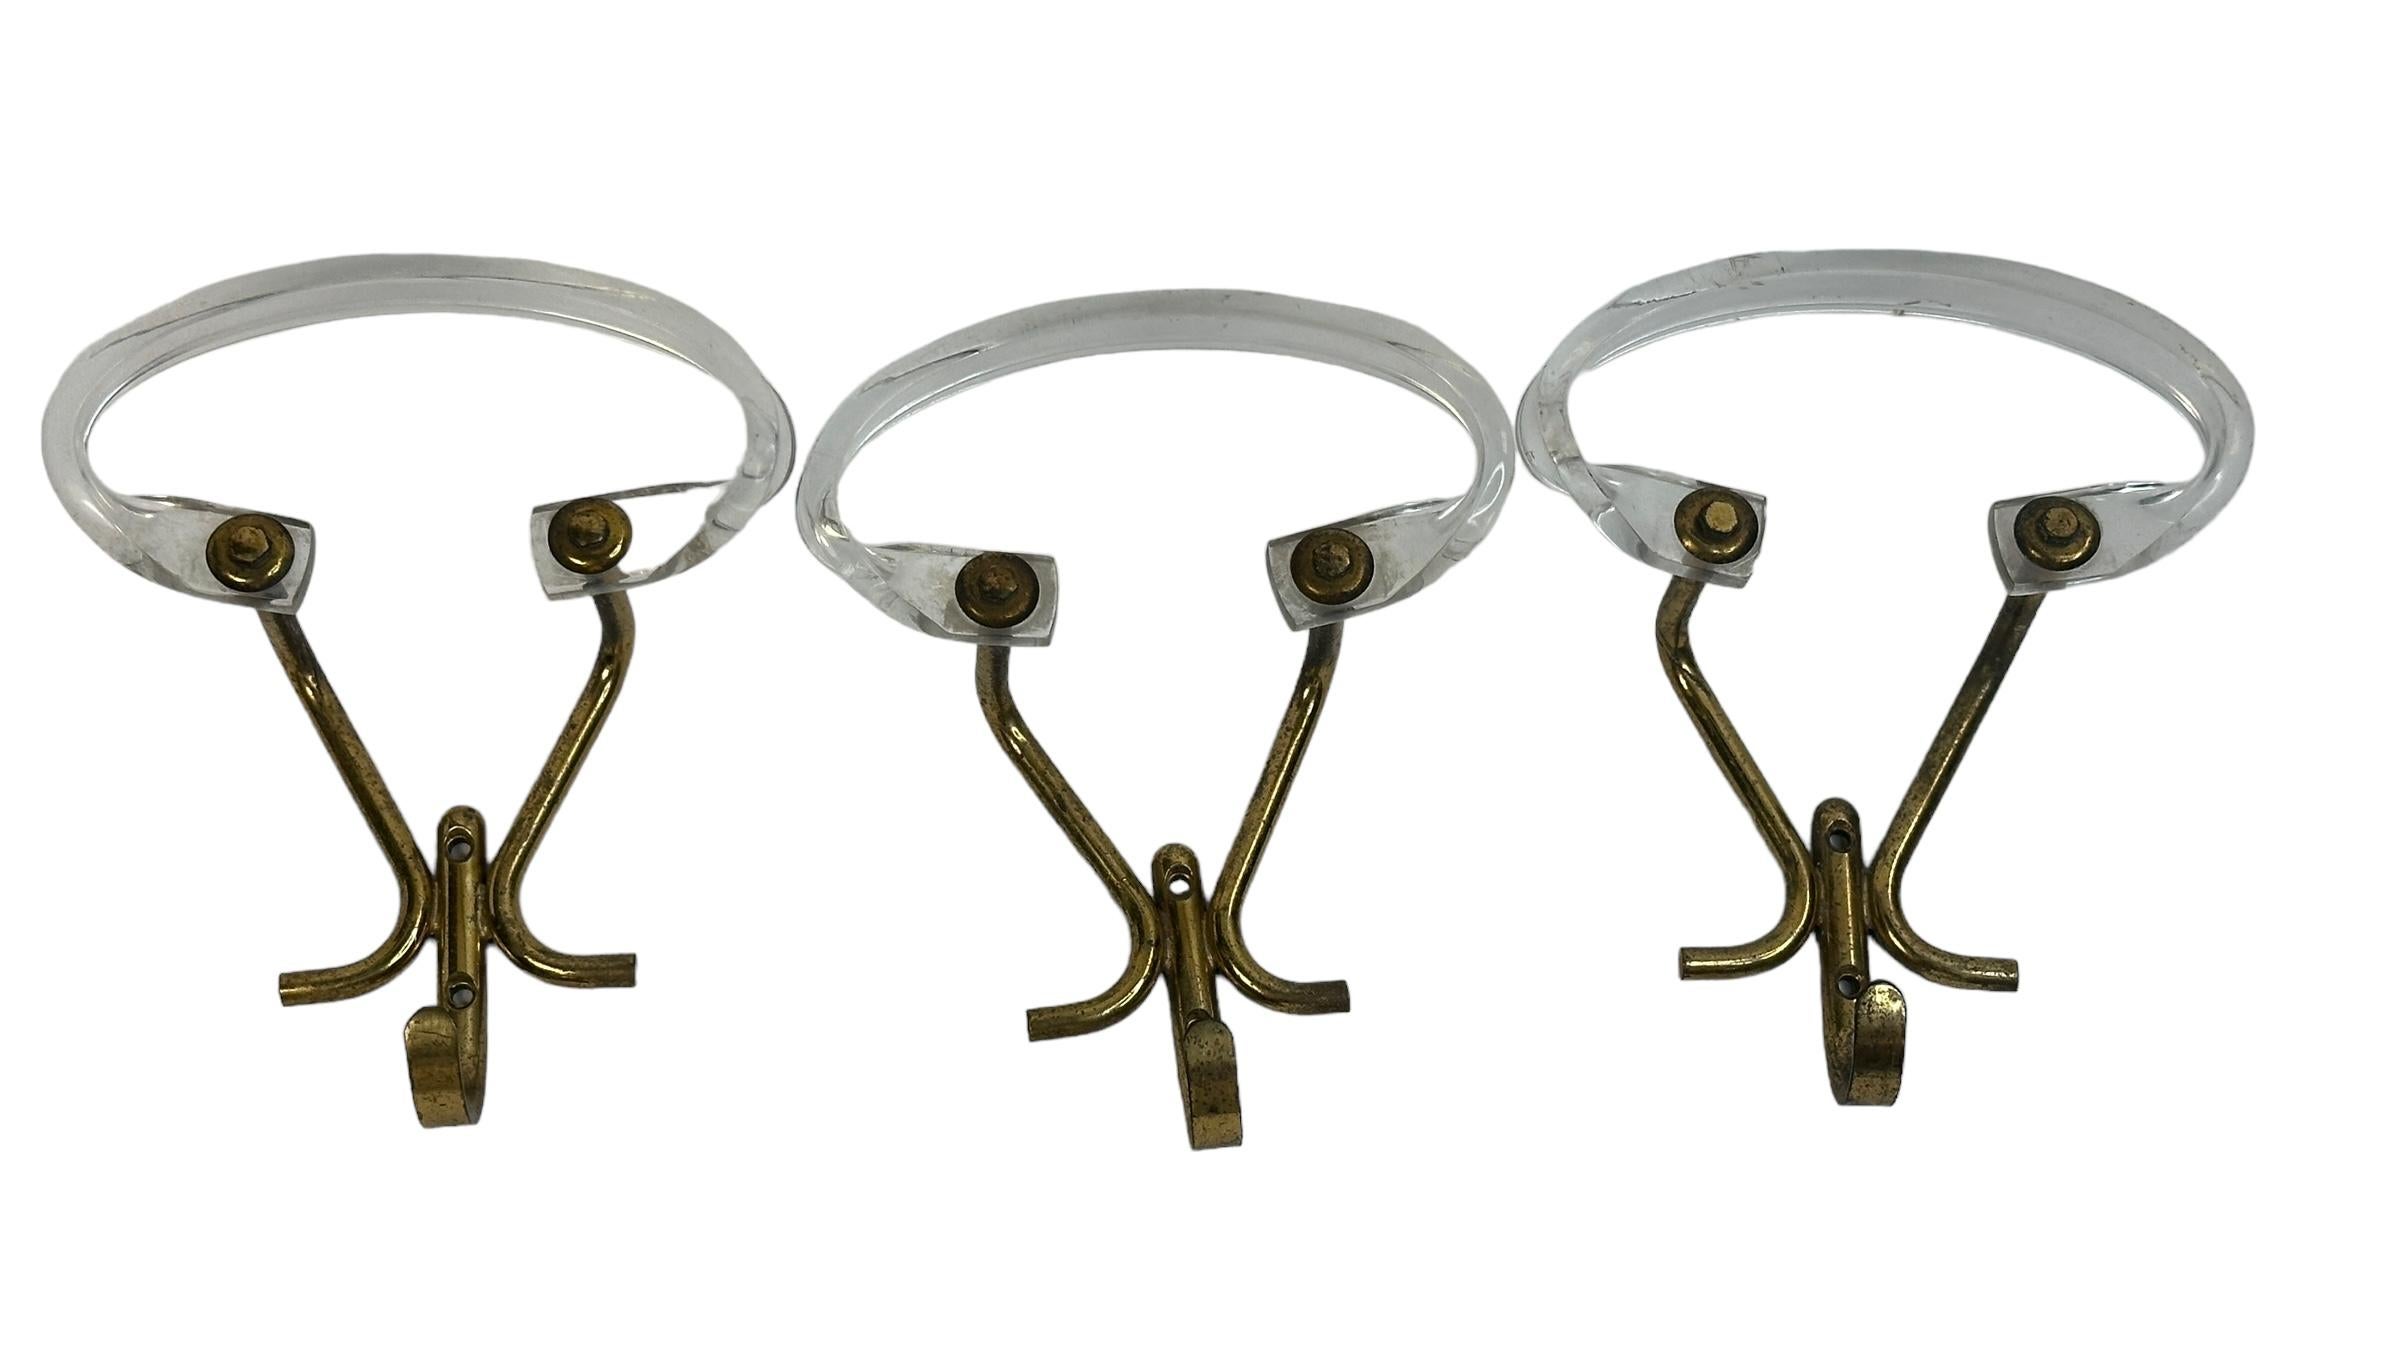 Mid-20th Century Set of Three Wall Coat Hooks, Lucite and Brass, Mid-Century Modern, 1960s For Sale